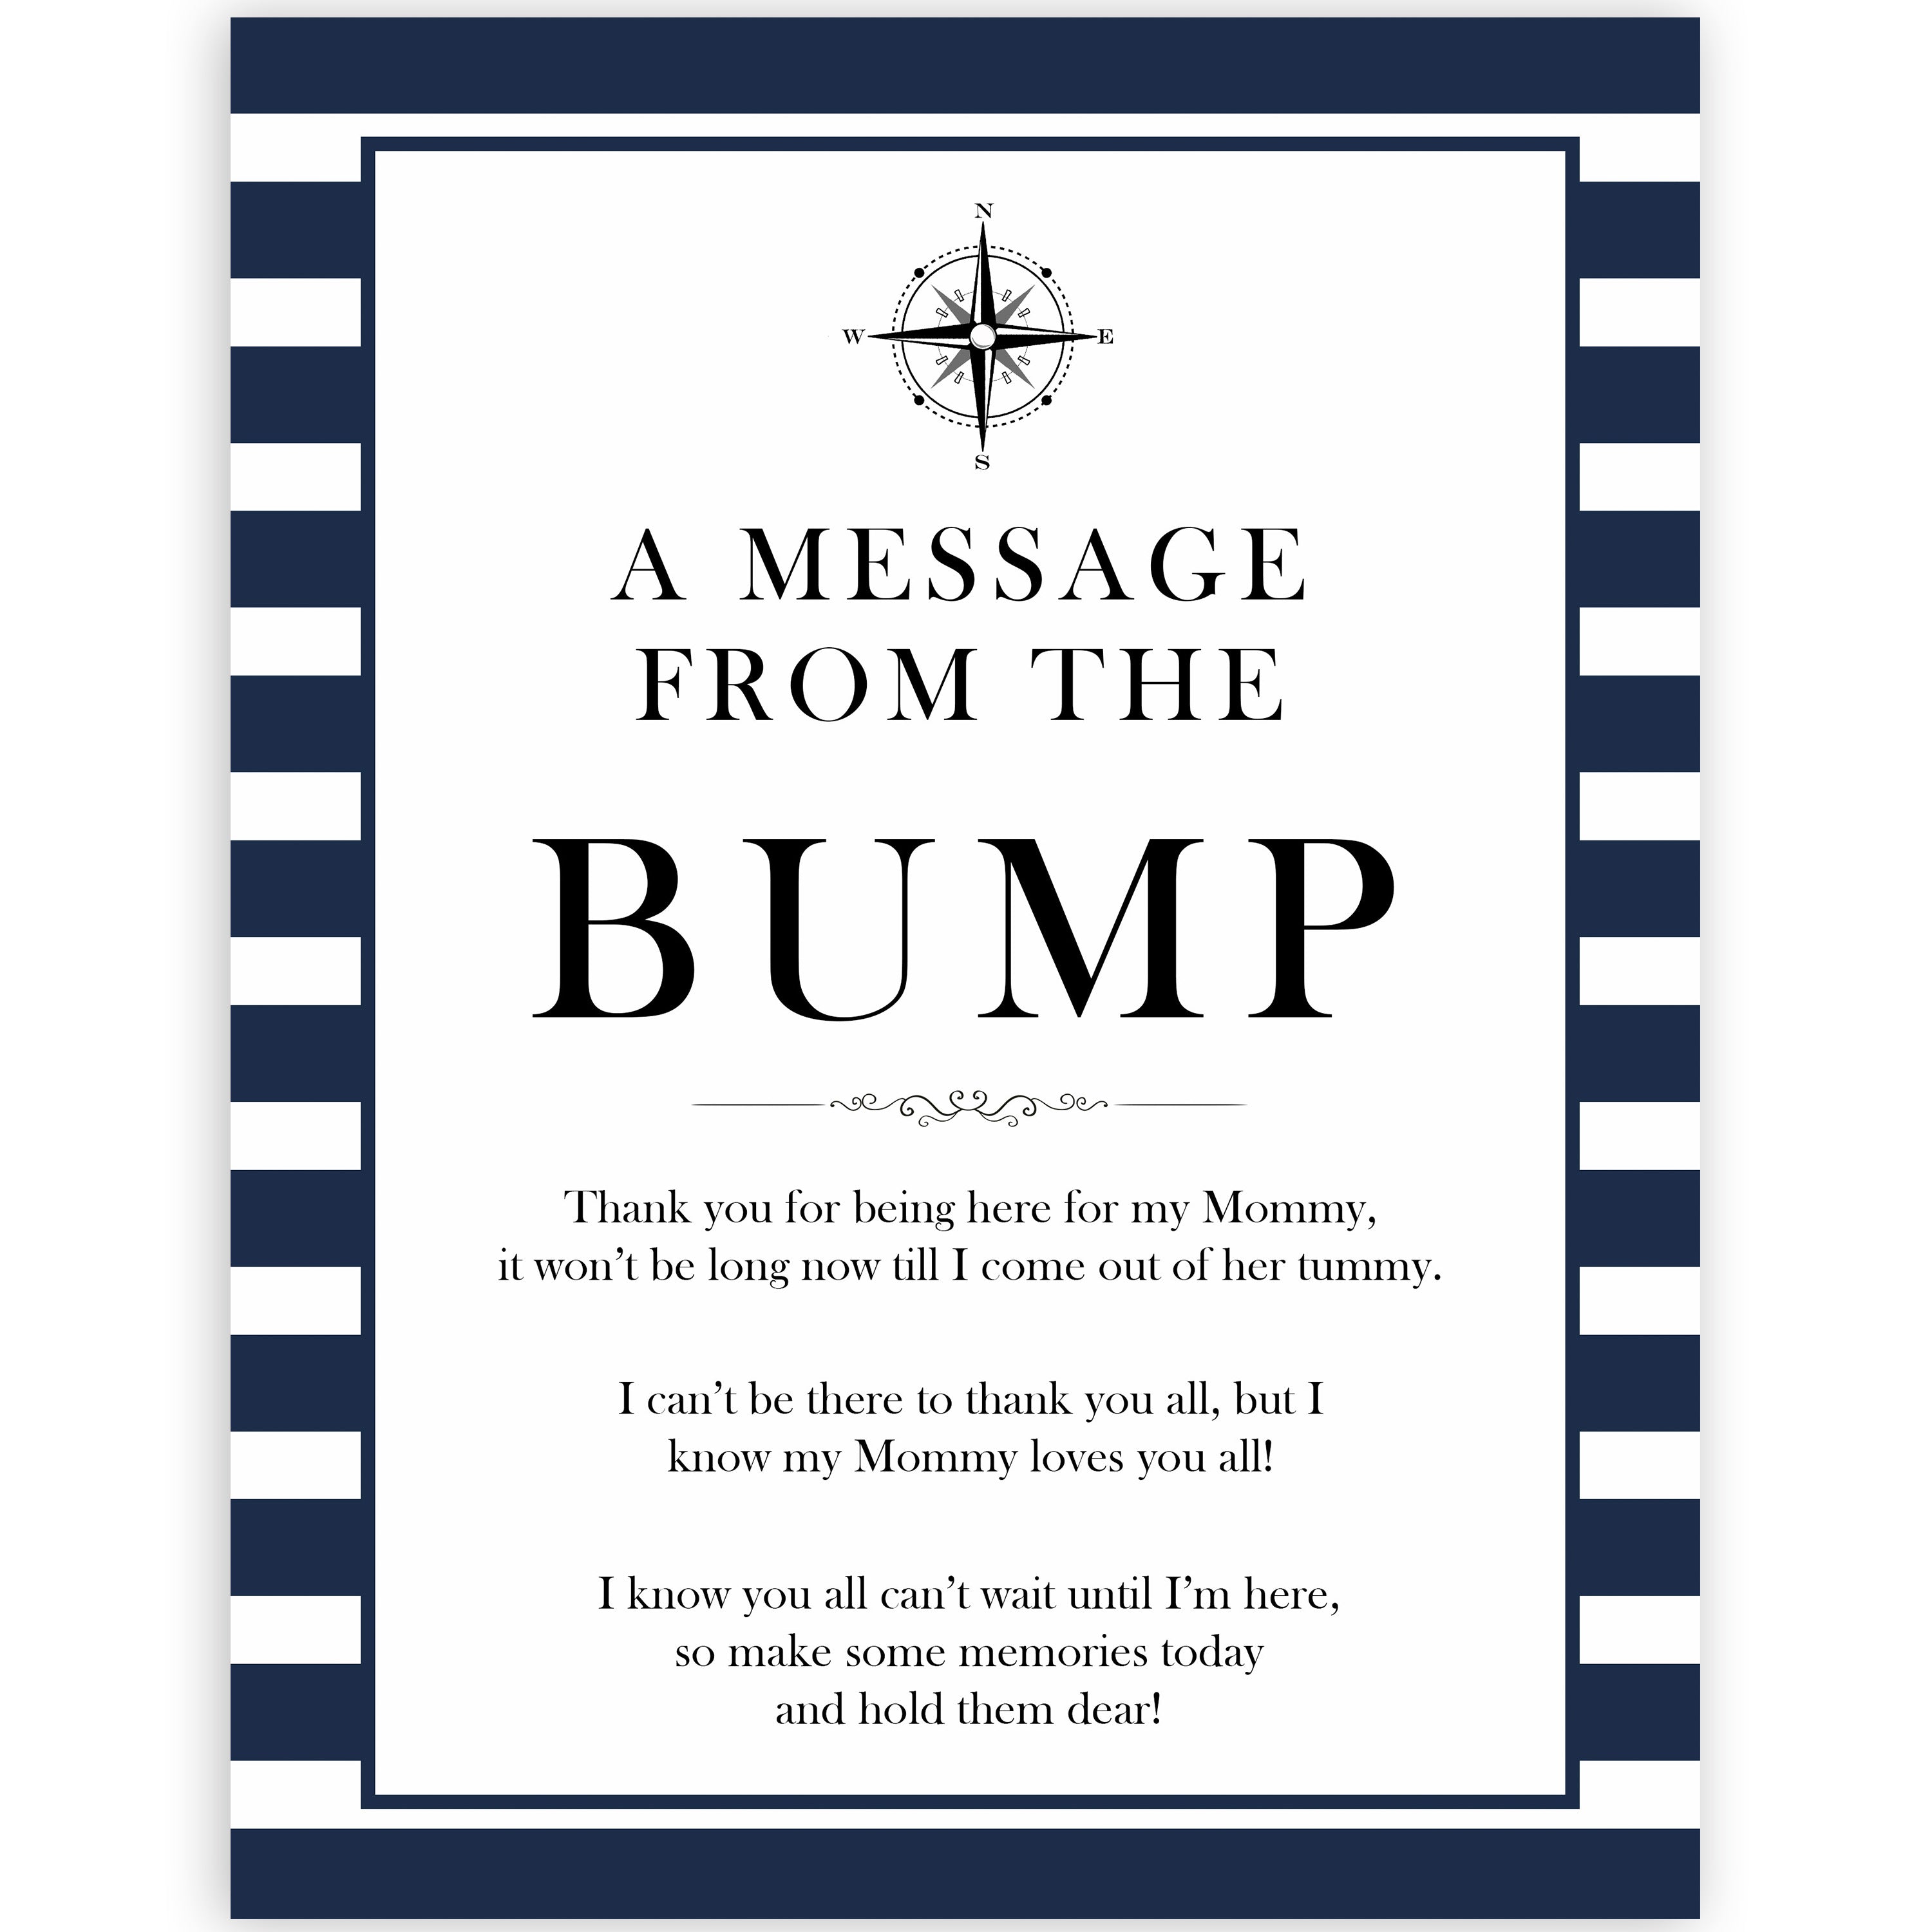 Nautical baby shower games, message from the bump baby shower games, printable baby shower games, baby shower games, fun baby games, ahoy its a boy, popular baby shower games, sailor baby games, boat baby games